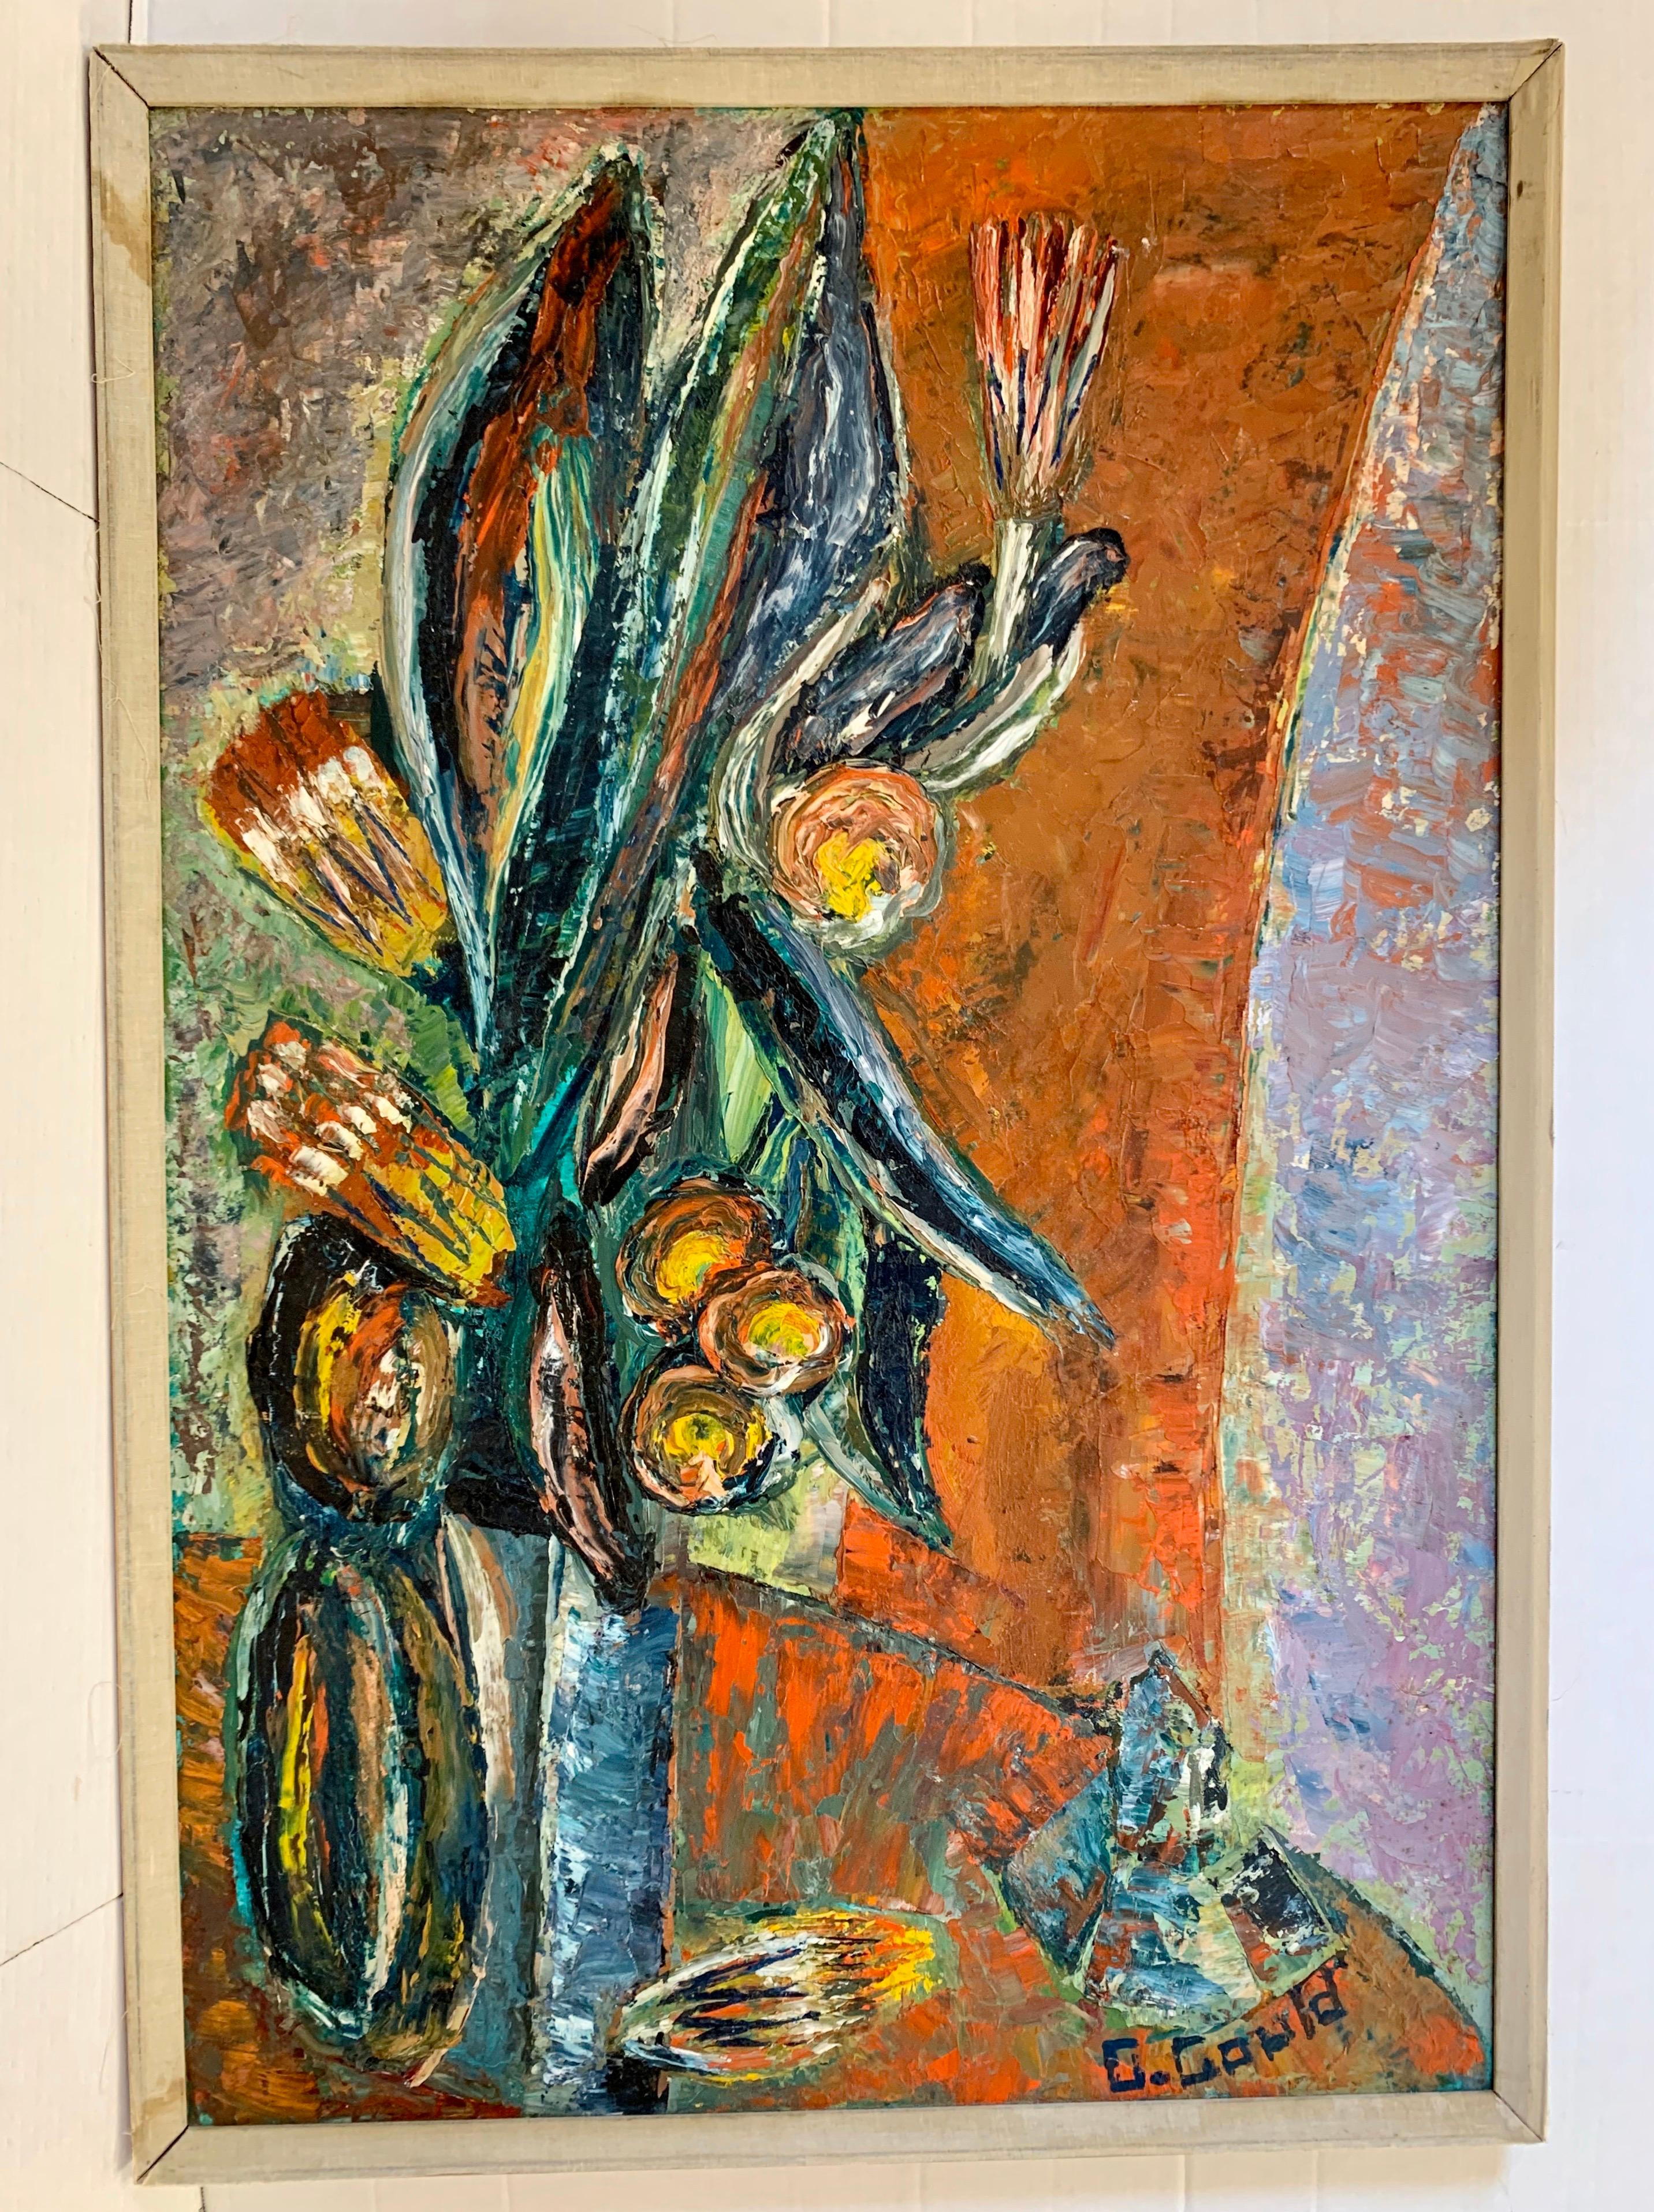 Unusual G. Gould signed midcentury floral still life painting. The medium is oil on board. The scale works for most rooms. With its whimsical theme and vibrant colors, this work of art would be a welcome
addition to both midcentury as well as more